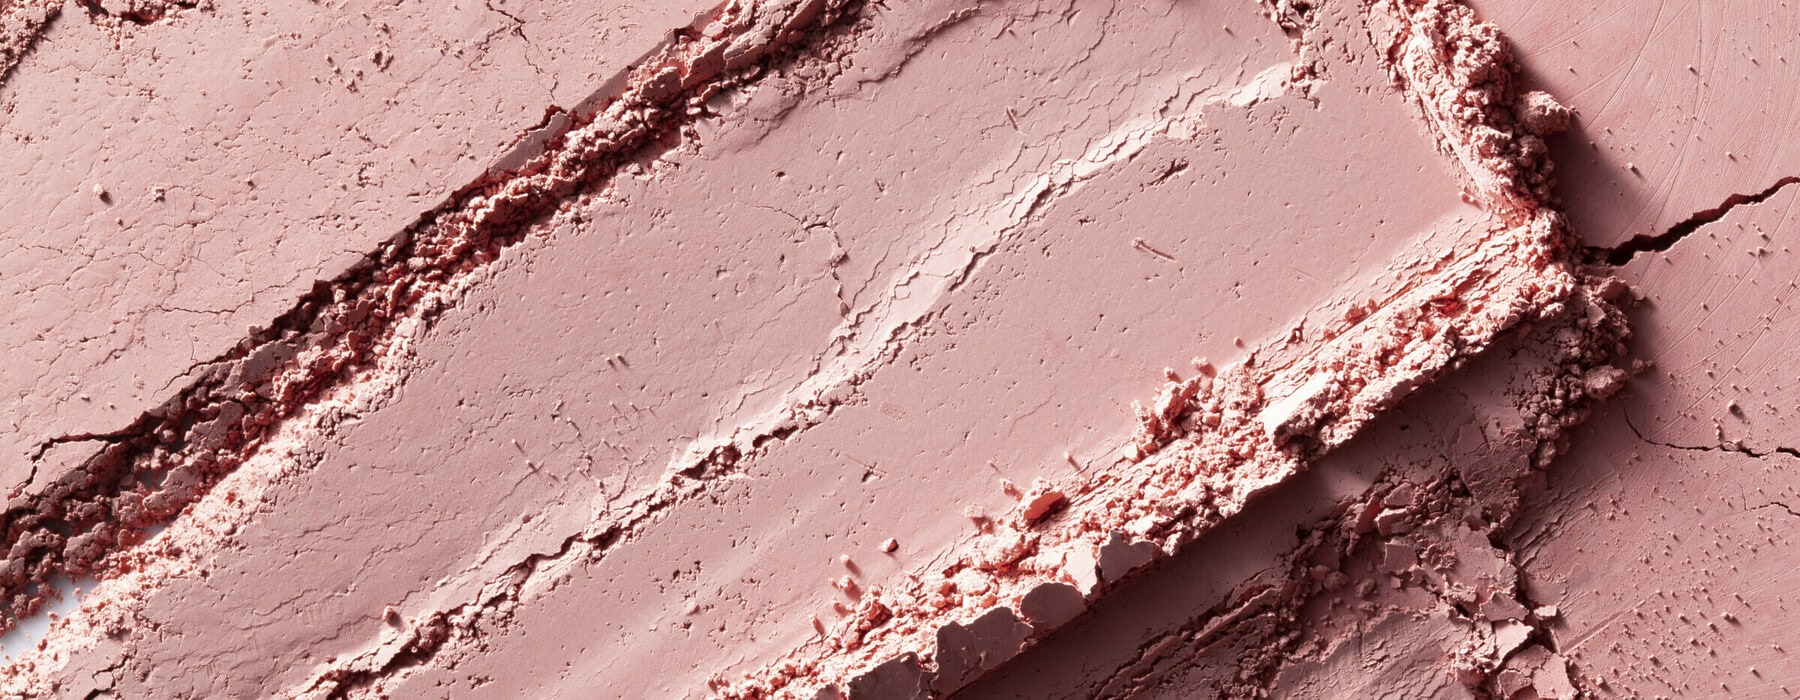 Crushed pink eyeshadow. Close-up photography.